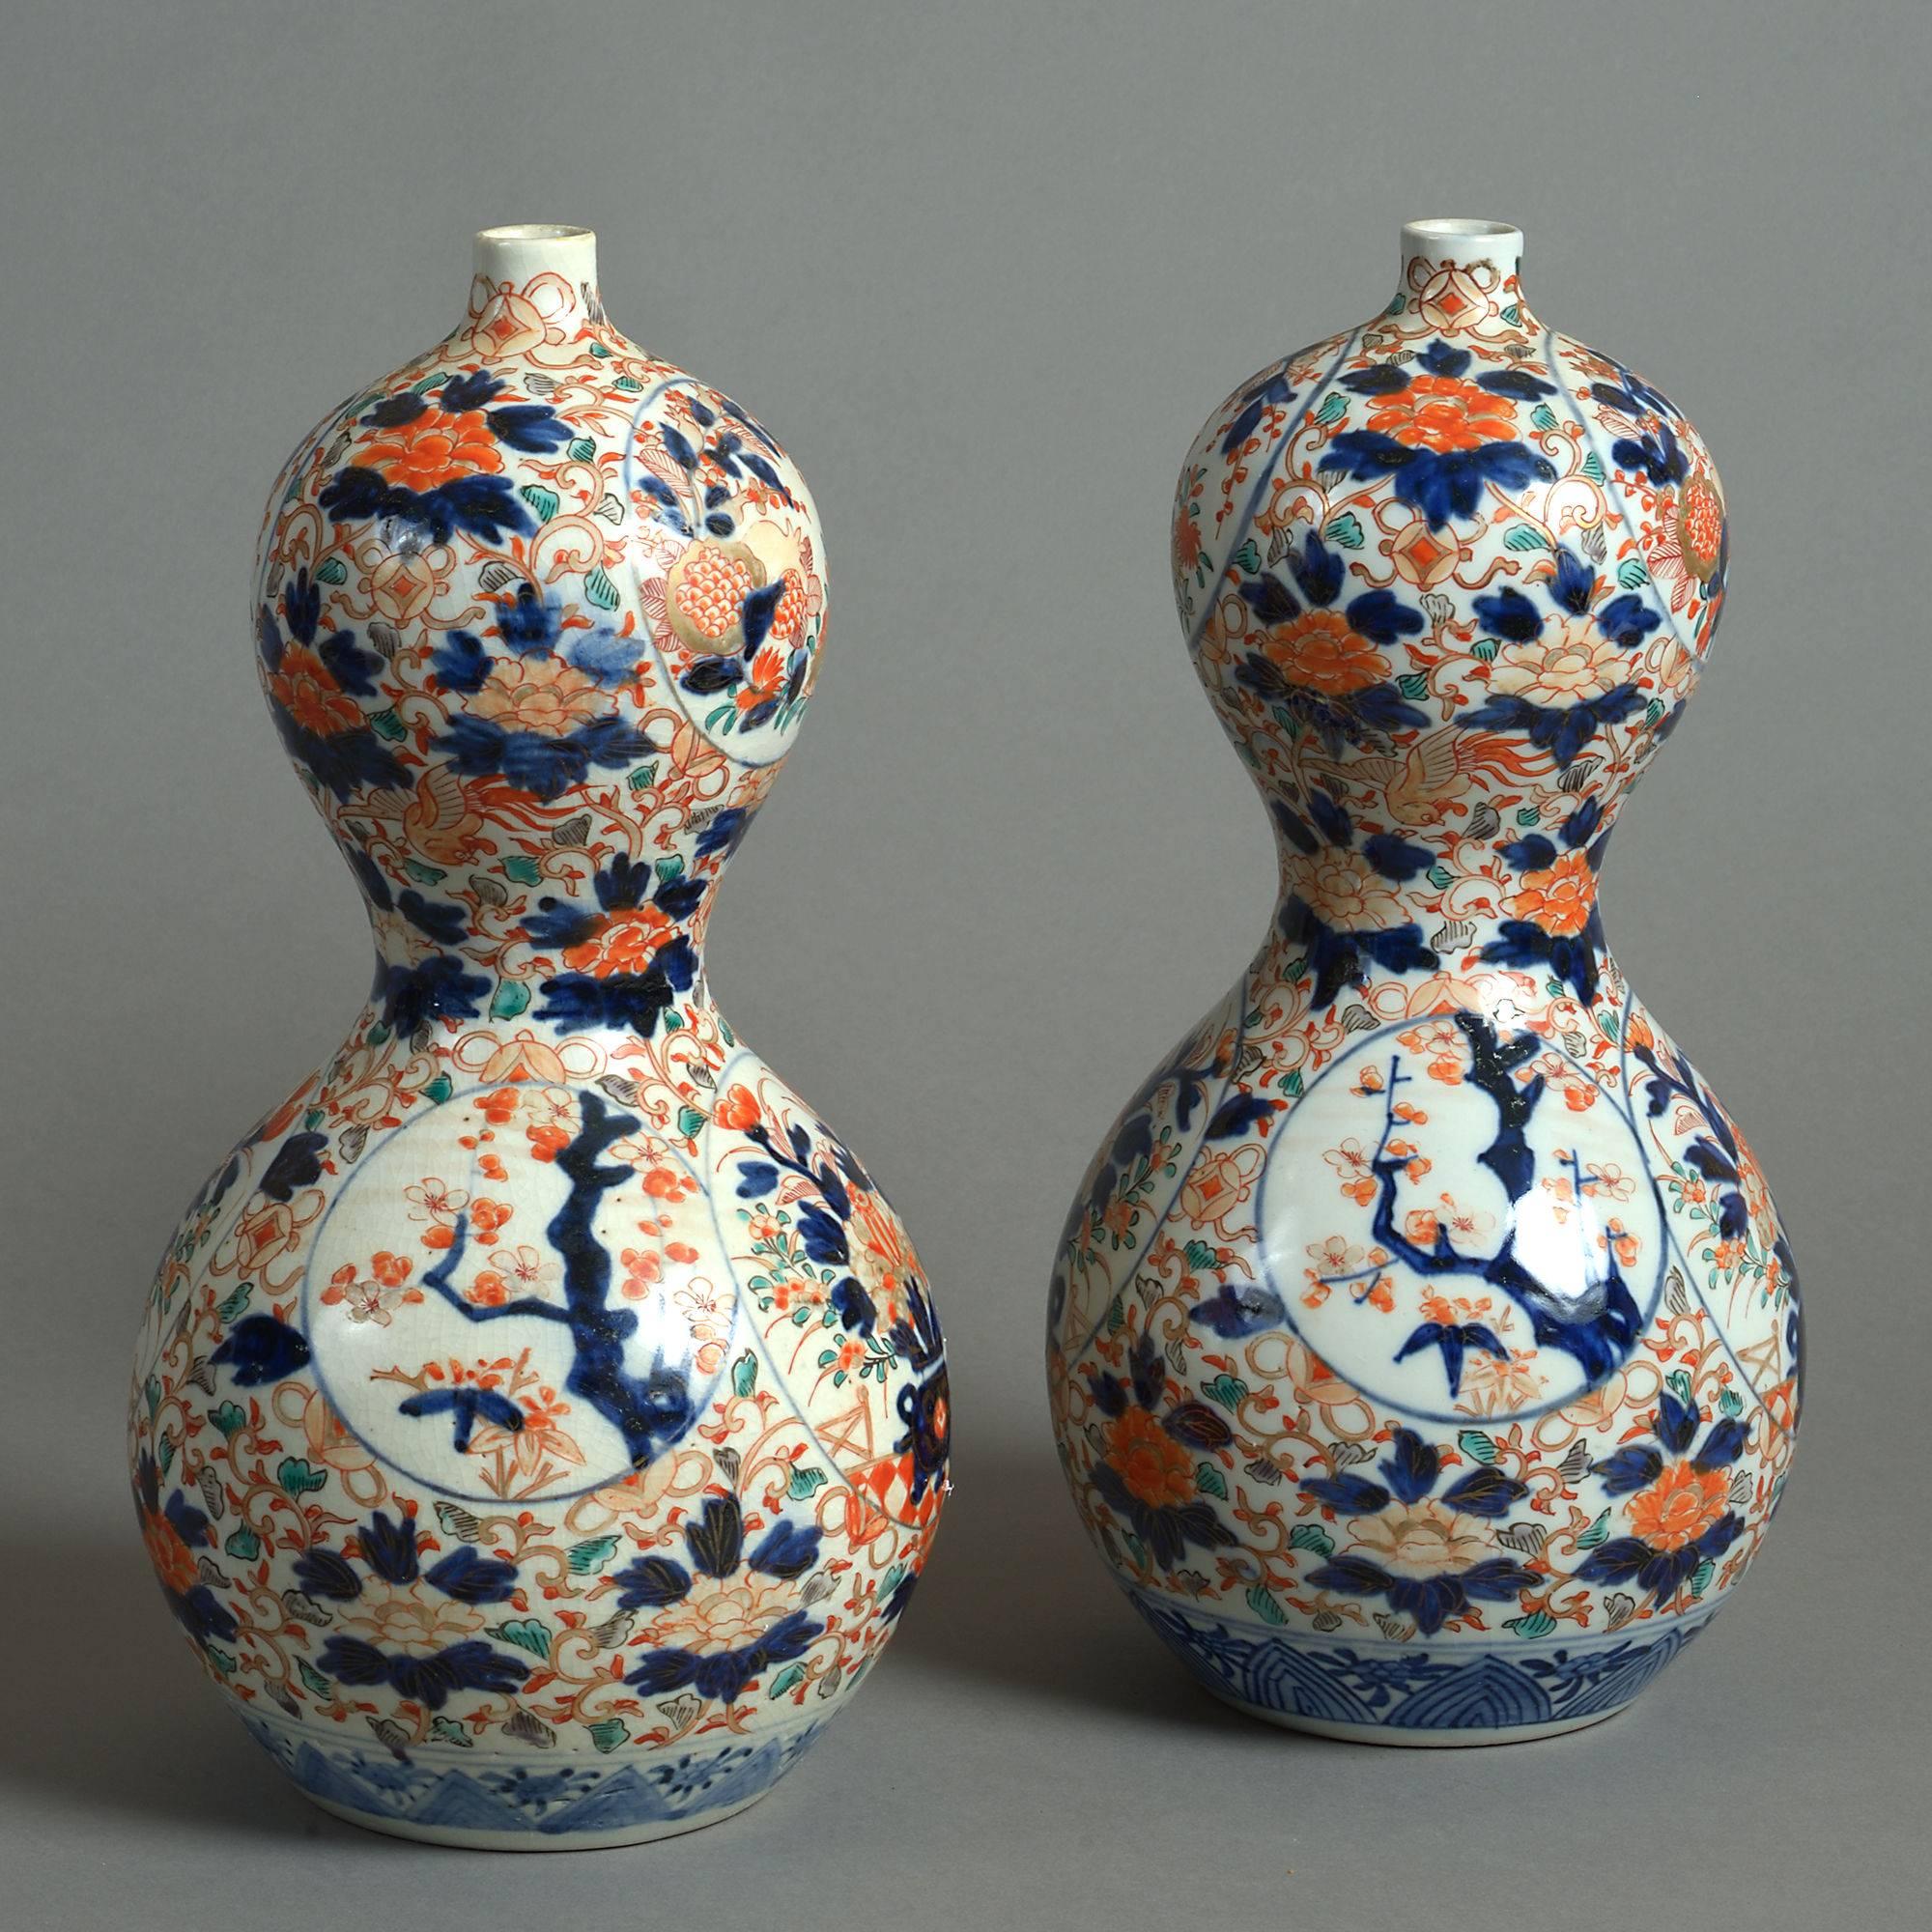 A pair of late 19th century Imari porcelain gourd vases, both decorated throughout with cartouches of floral and foliate motifs upon a ground of the same.

Meiji period.